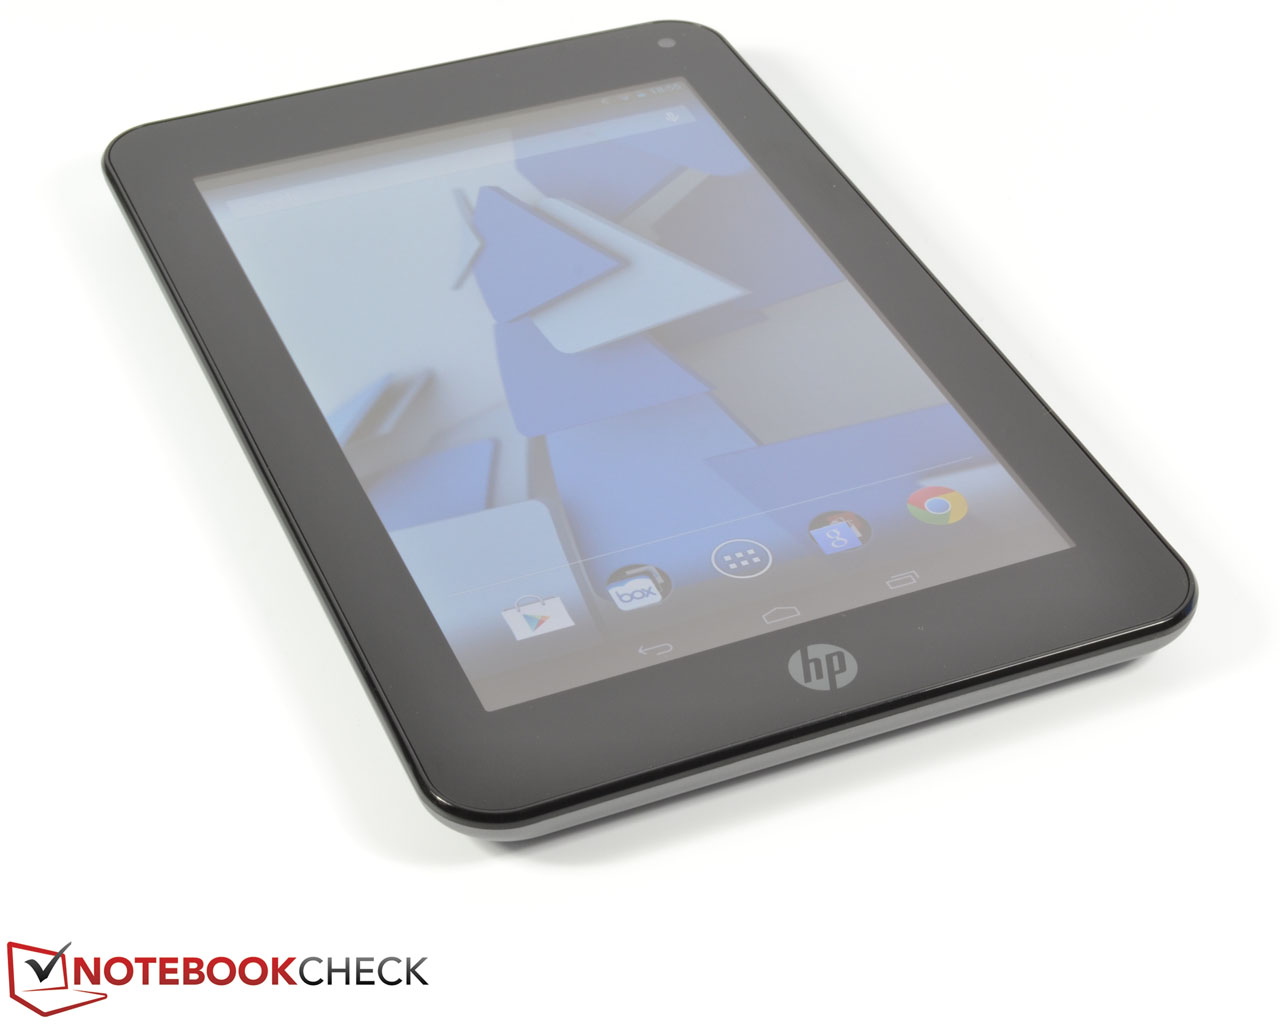 Review HP Slate 7 Plus 4200ef Tablet - NotebookCheck.net Reviews